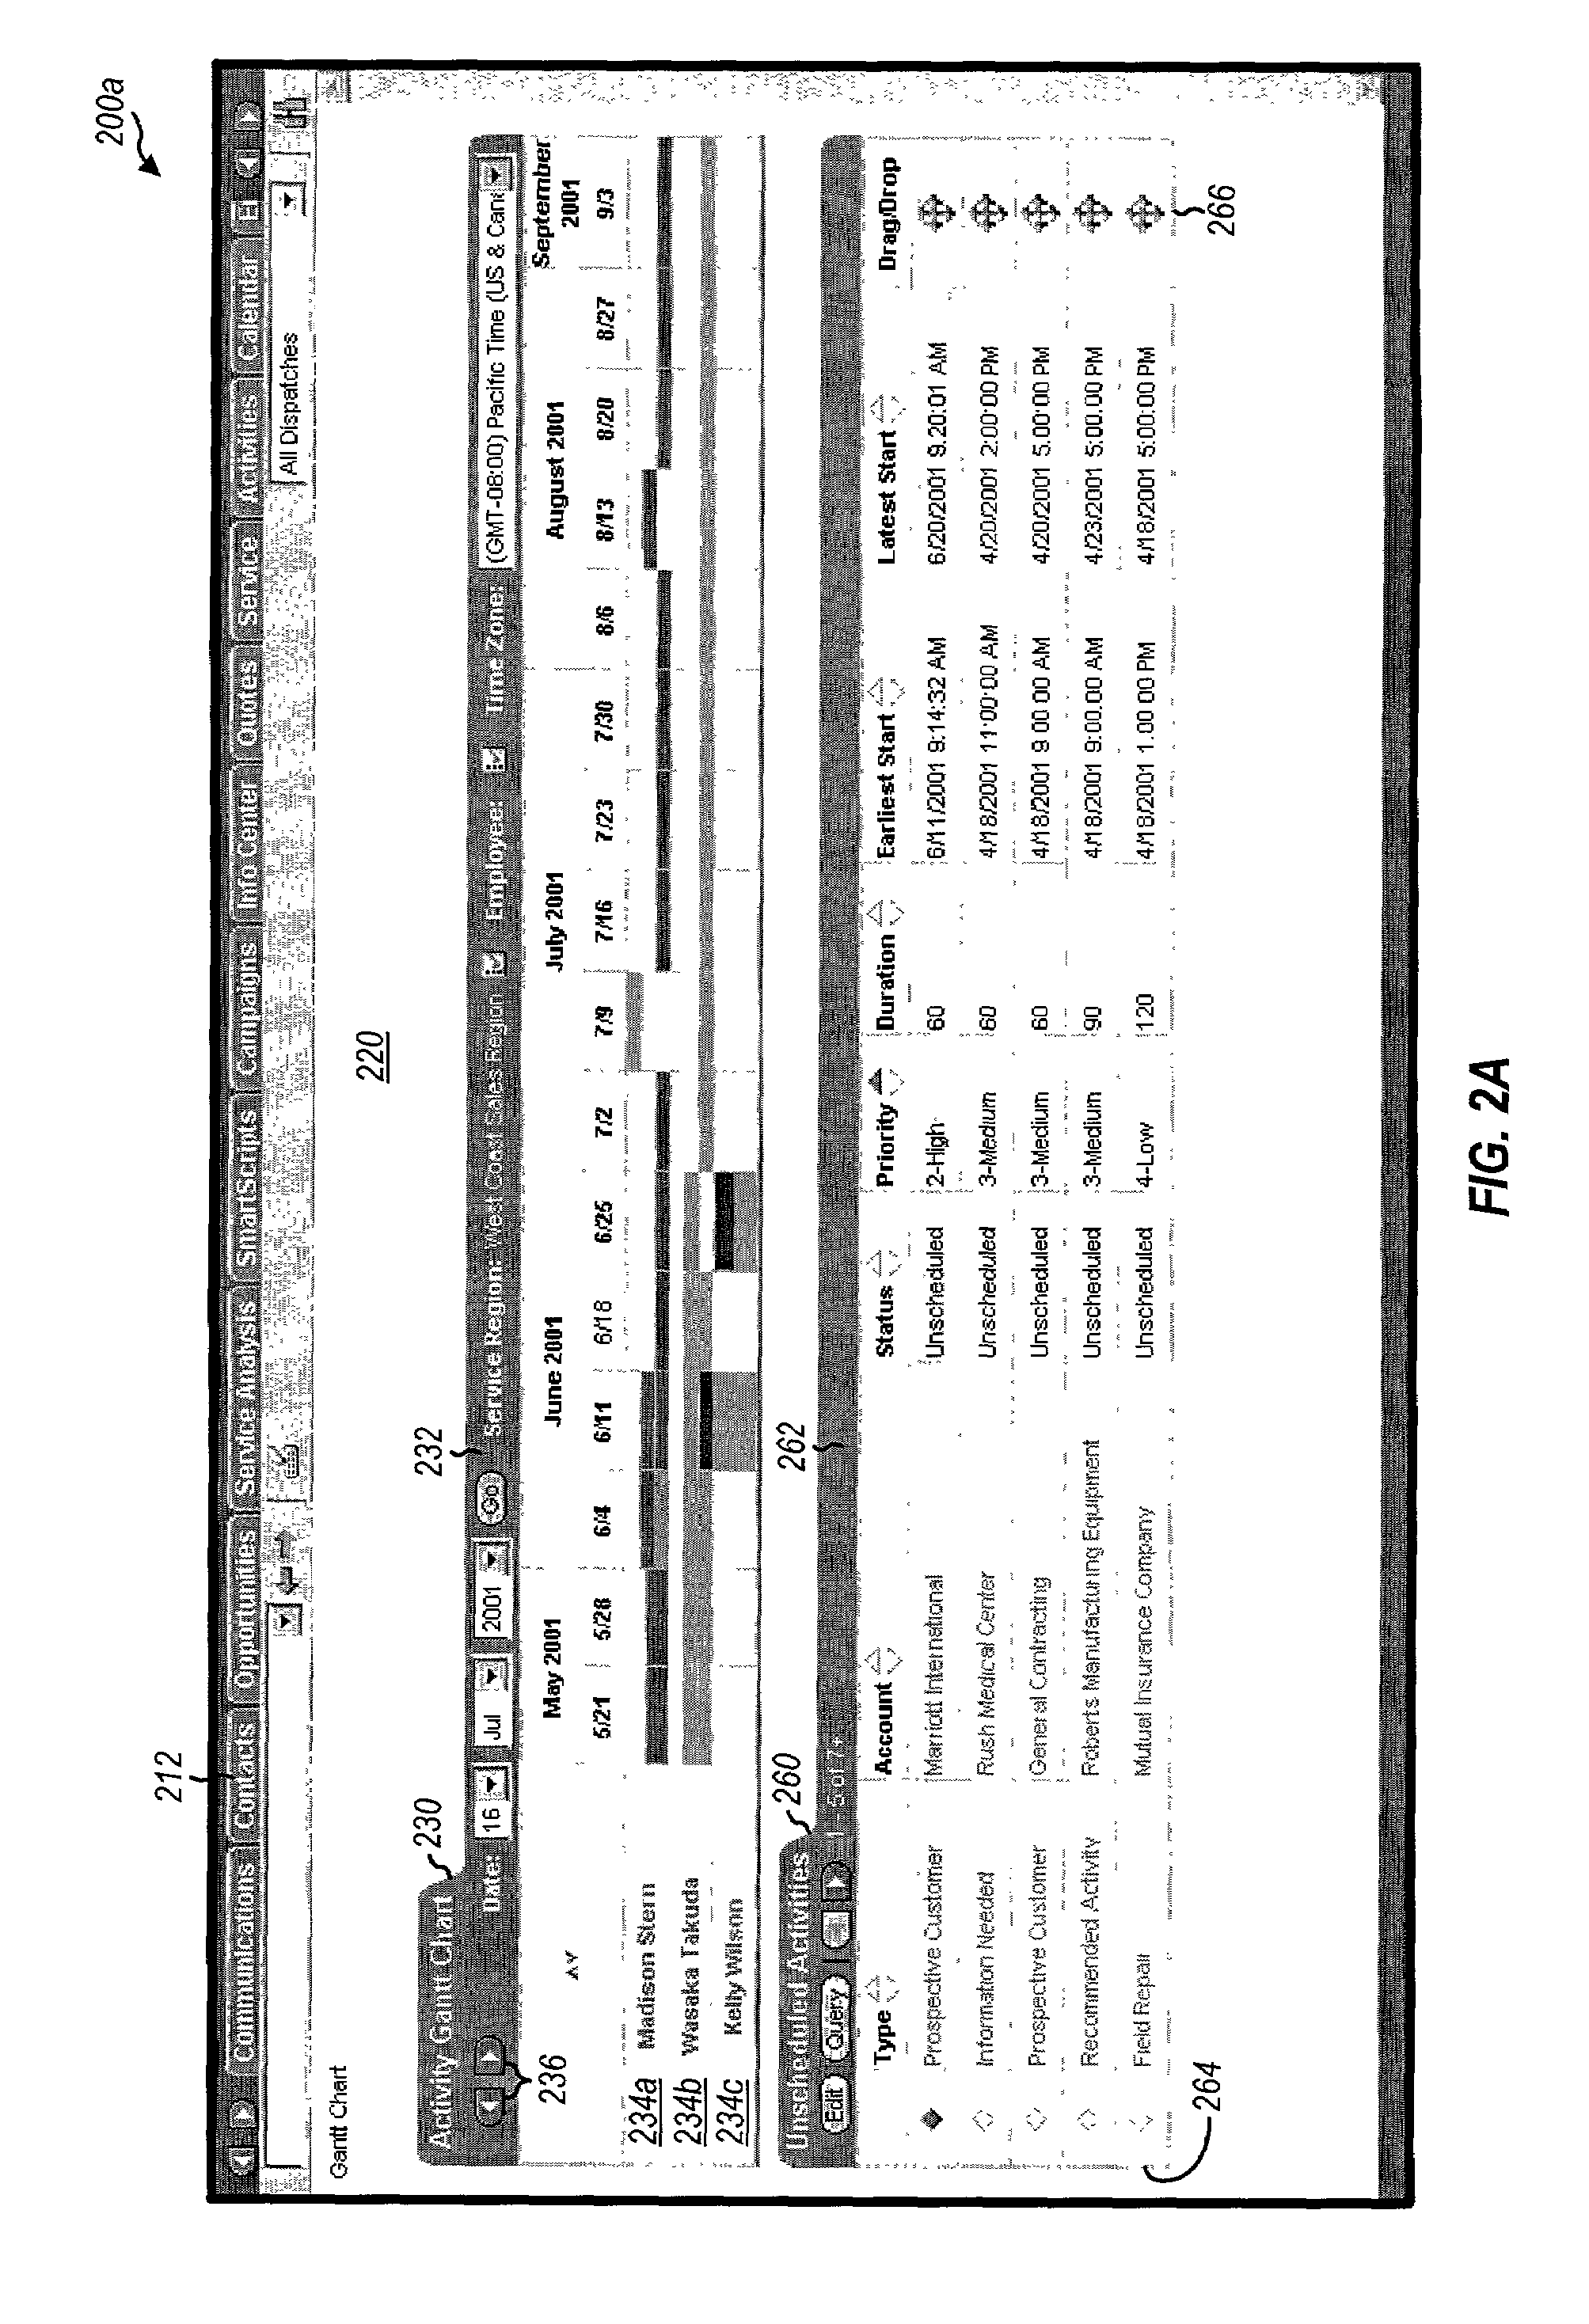 System and method for facilitating user interaction in a browser environment